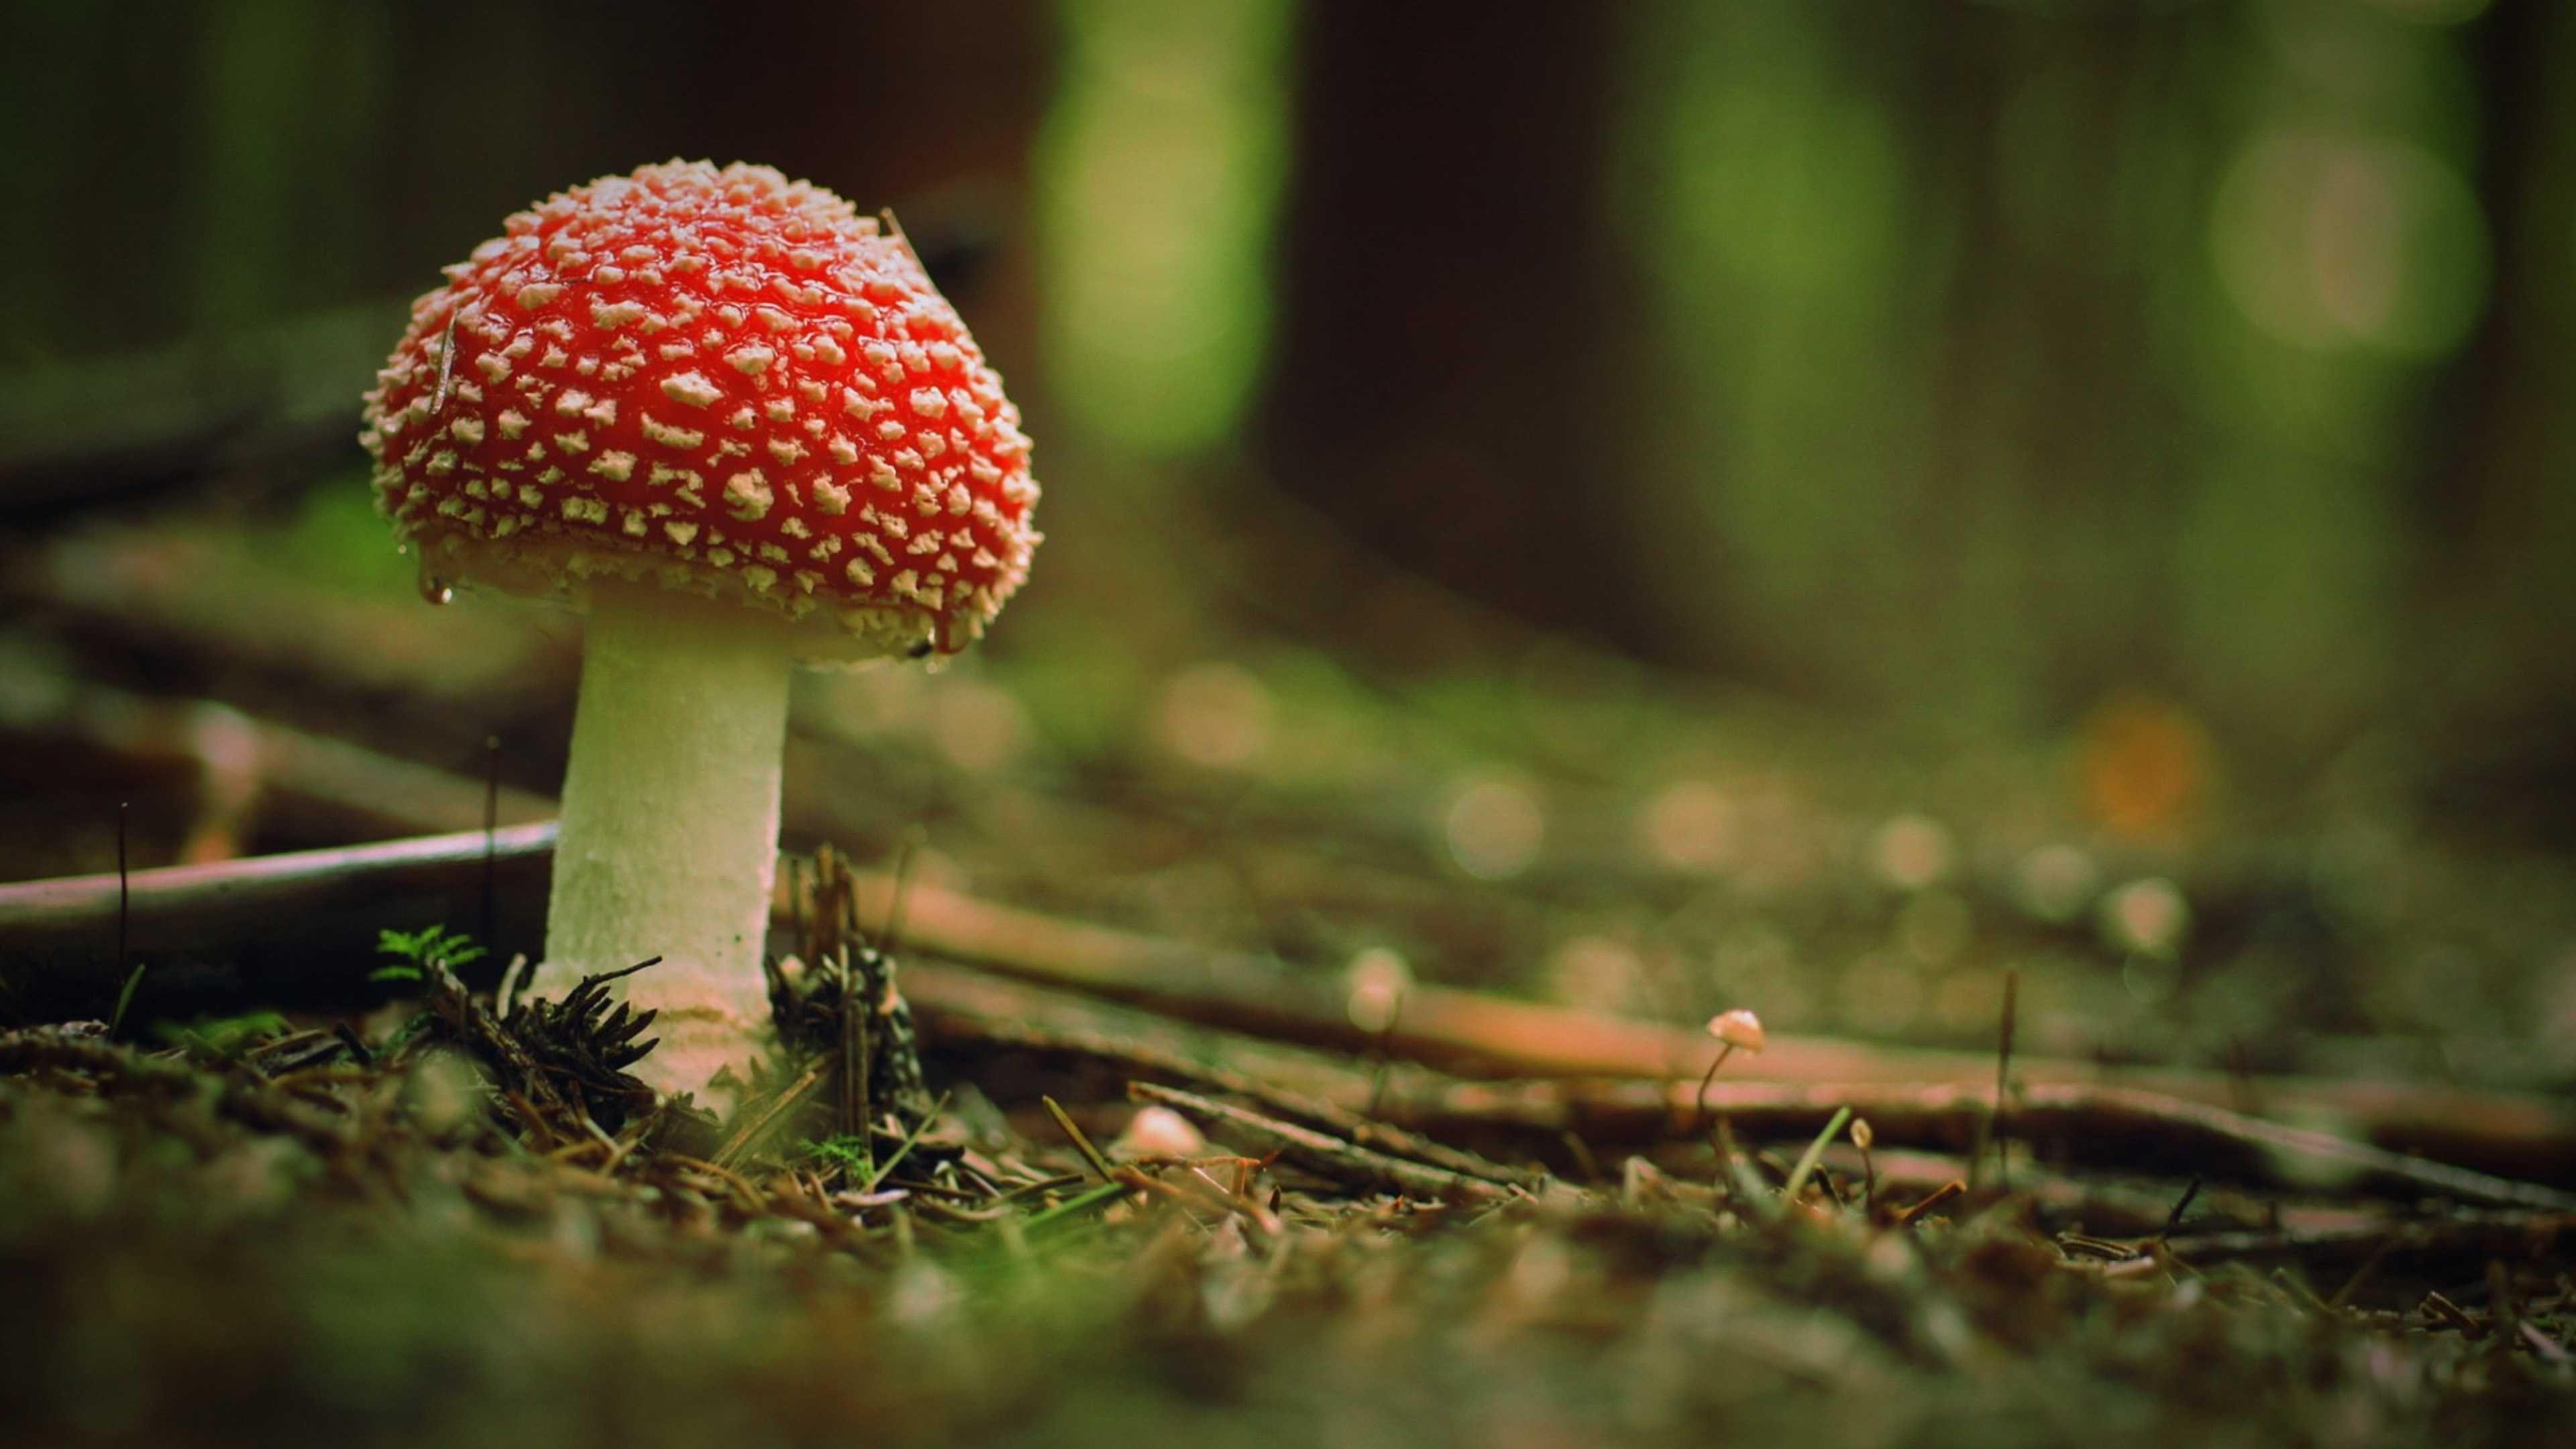 Wallpaper Download 3840x2160 Beautiful poison mushroom in the woods